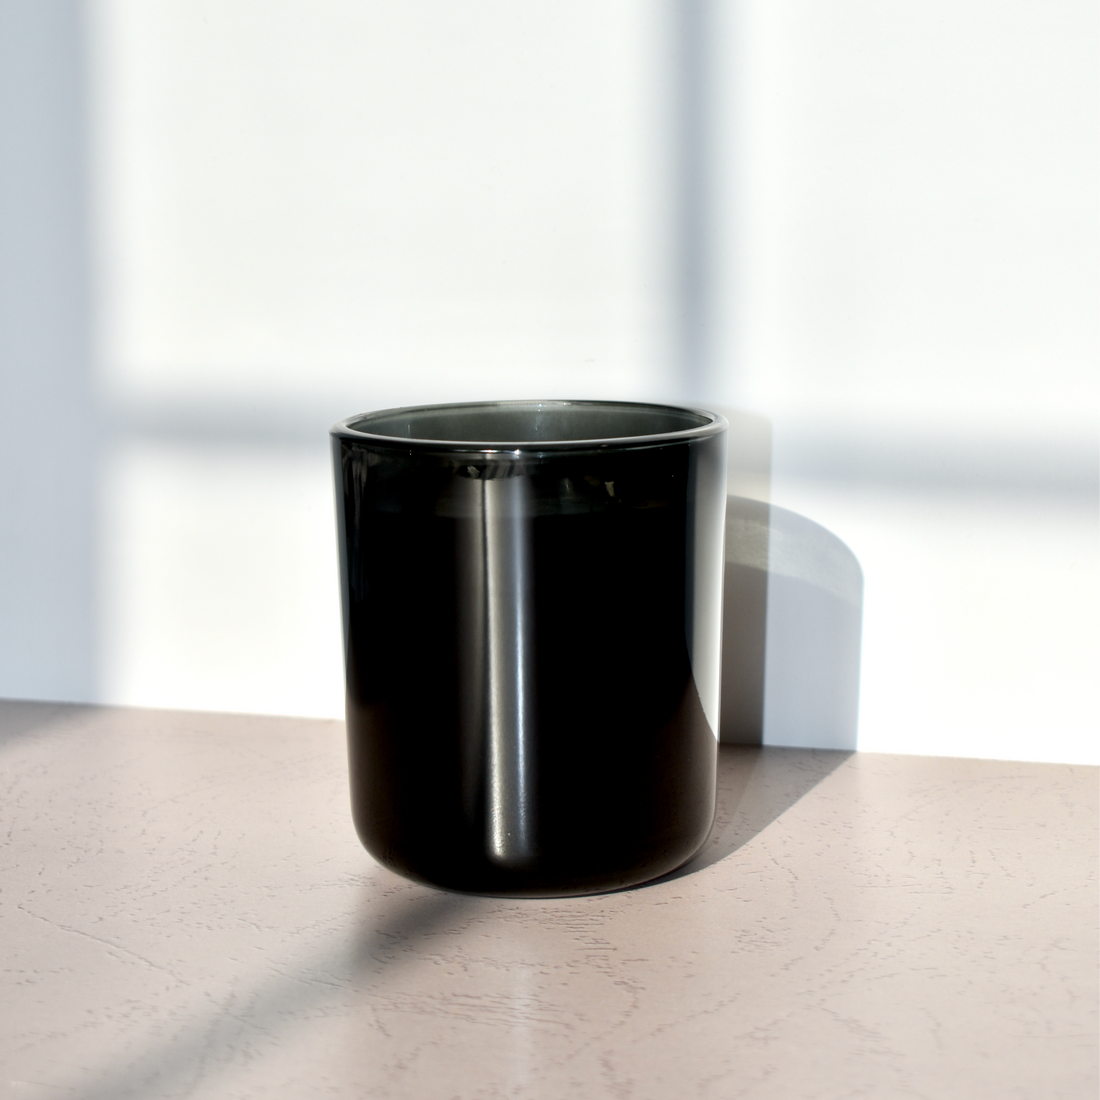 candle in black glass vessel. luxury fragrance.